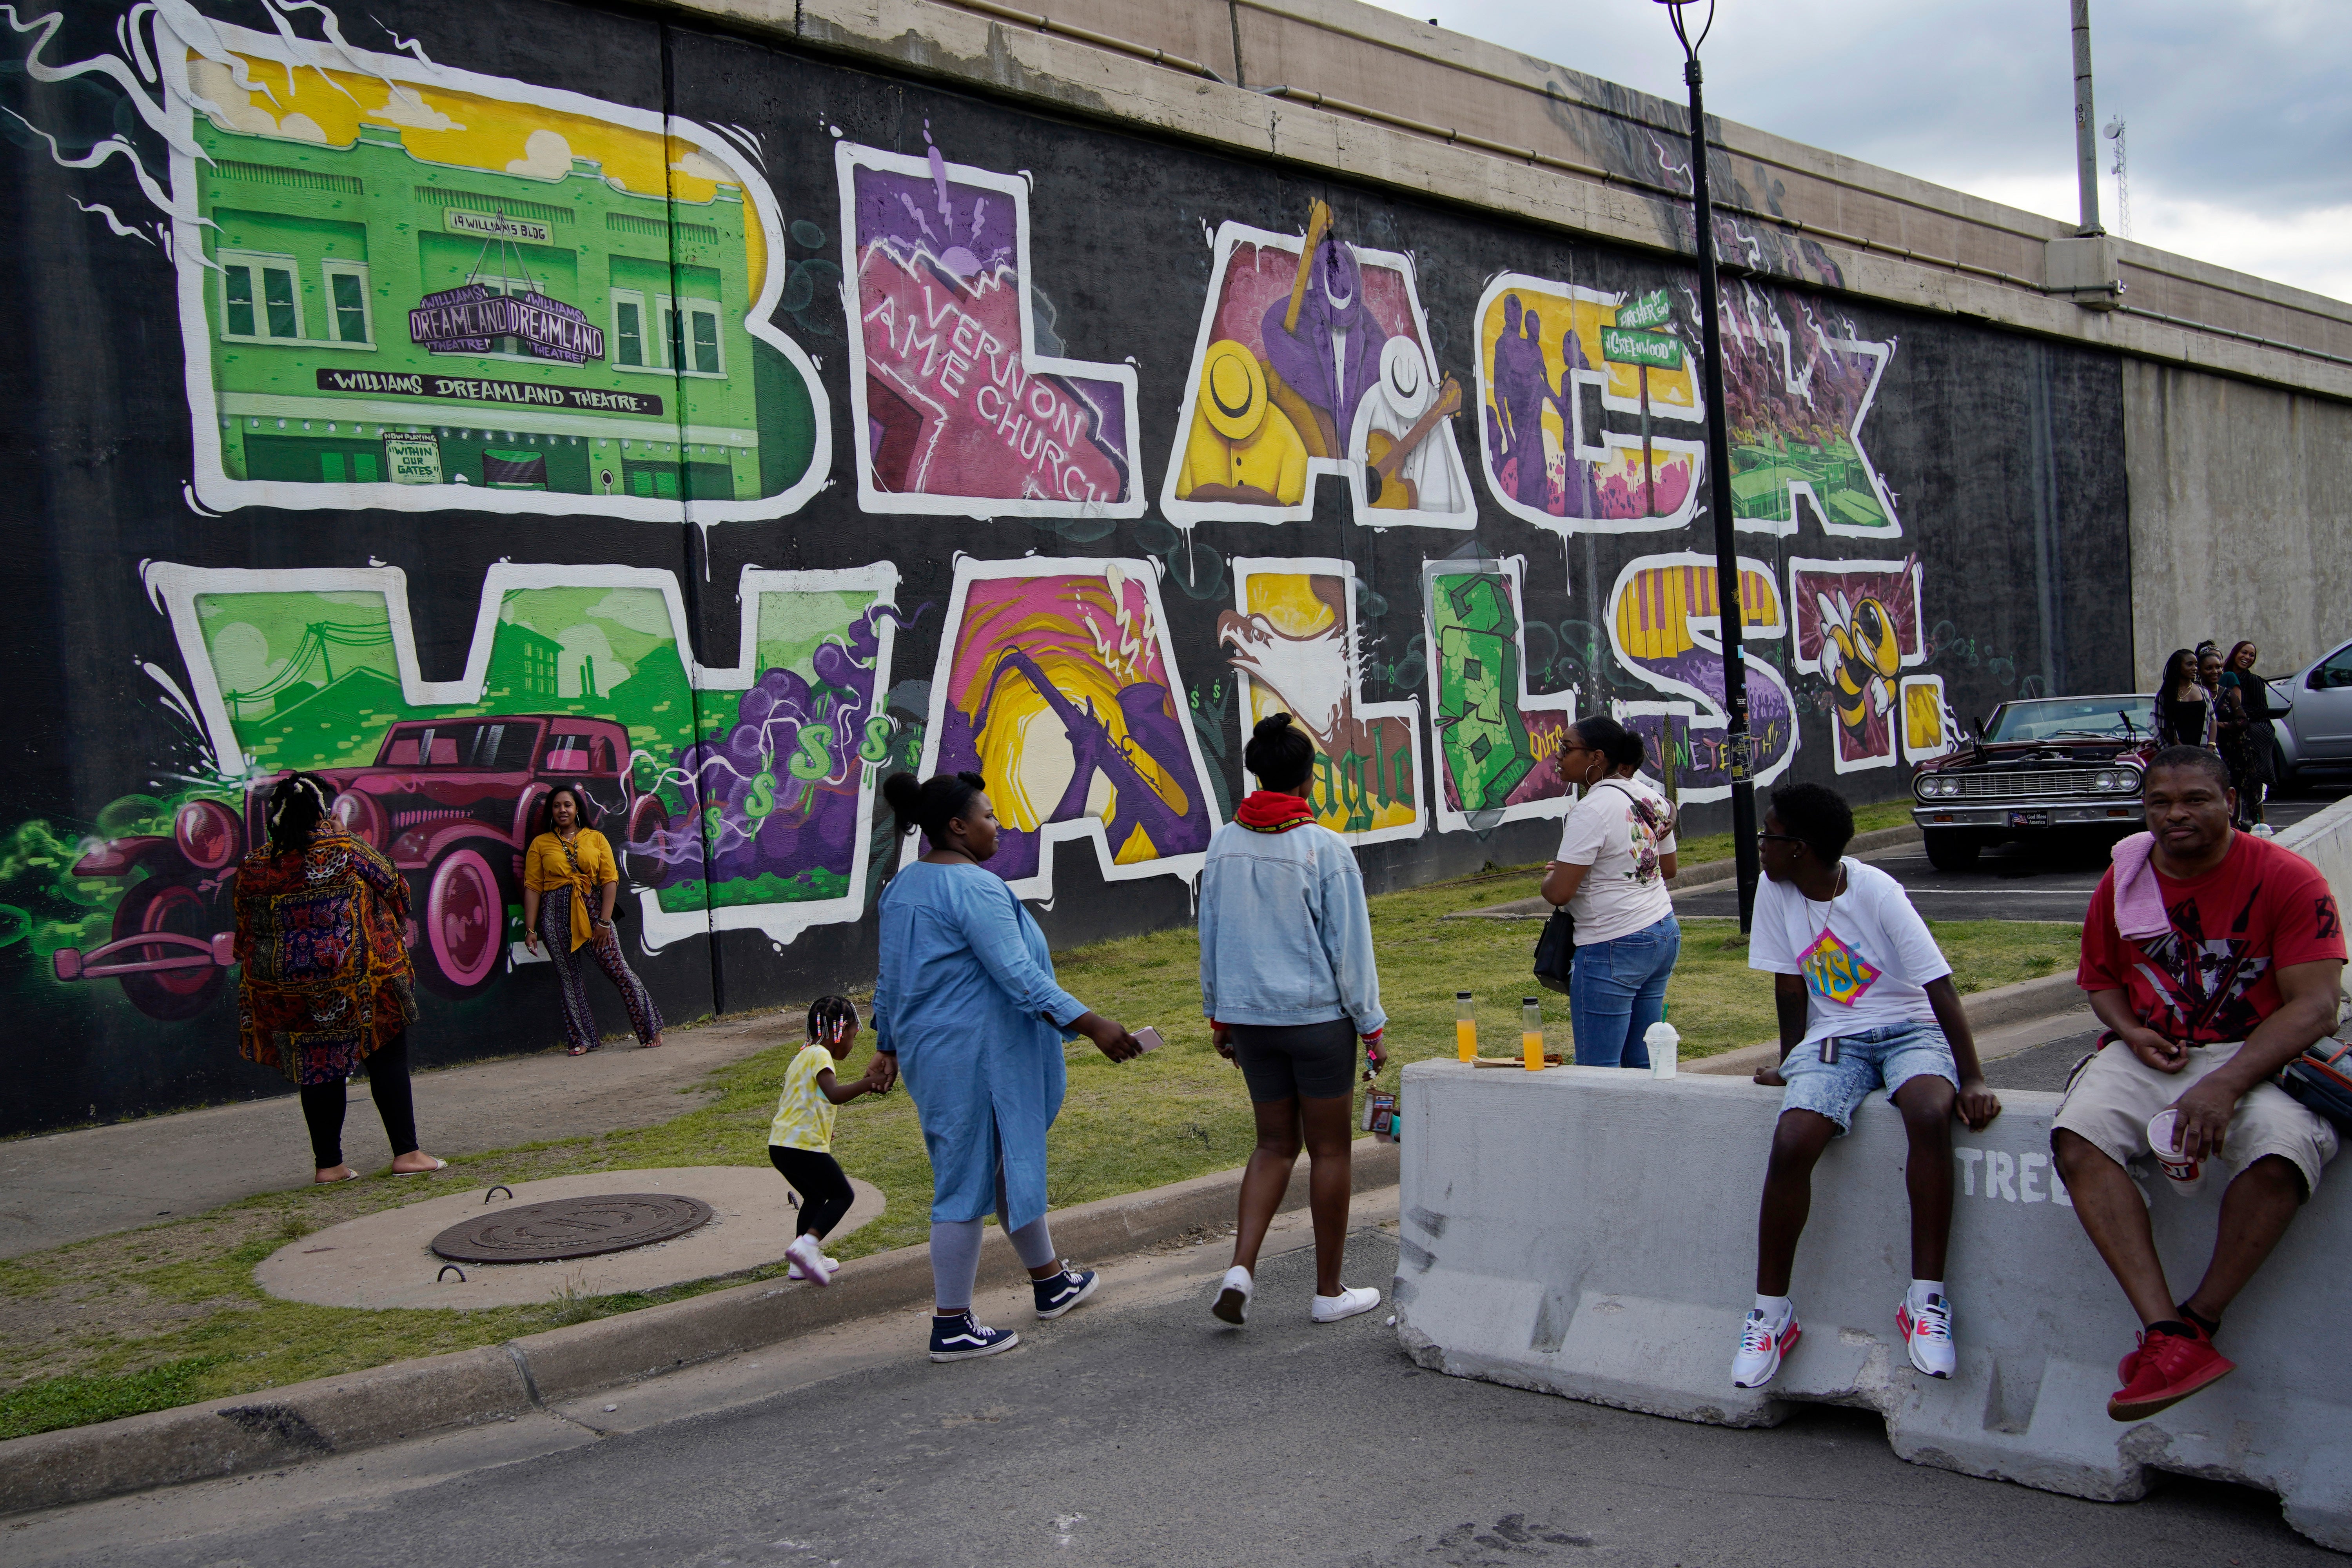 A mural in Tulsa recognises Black Wall Street.